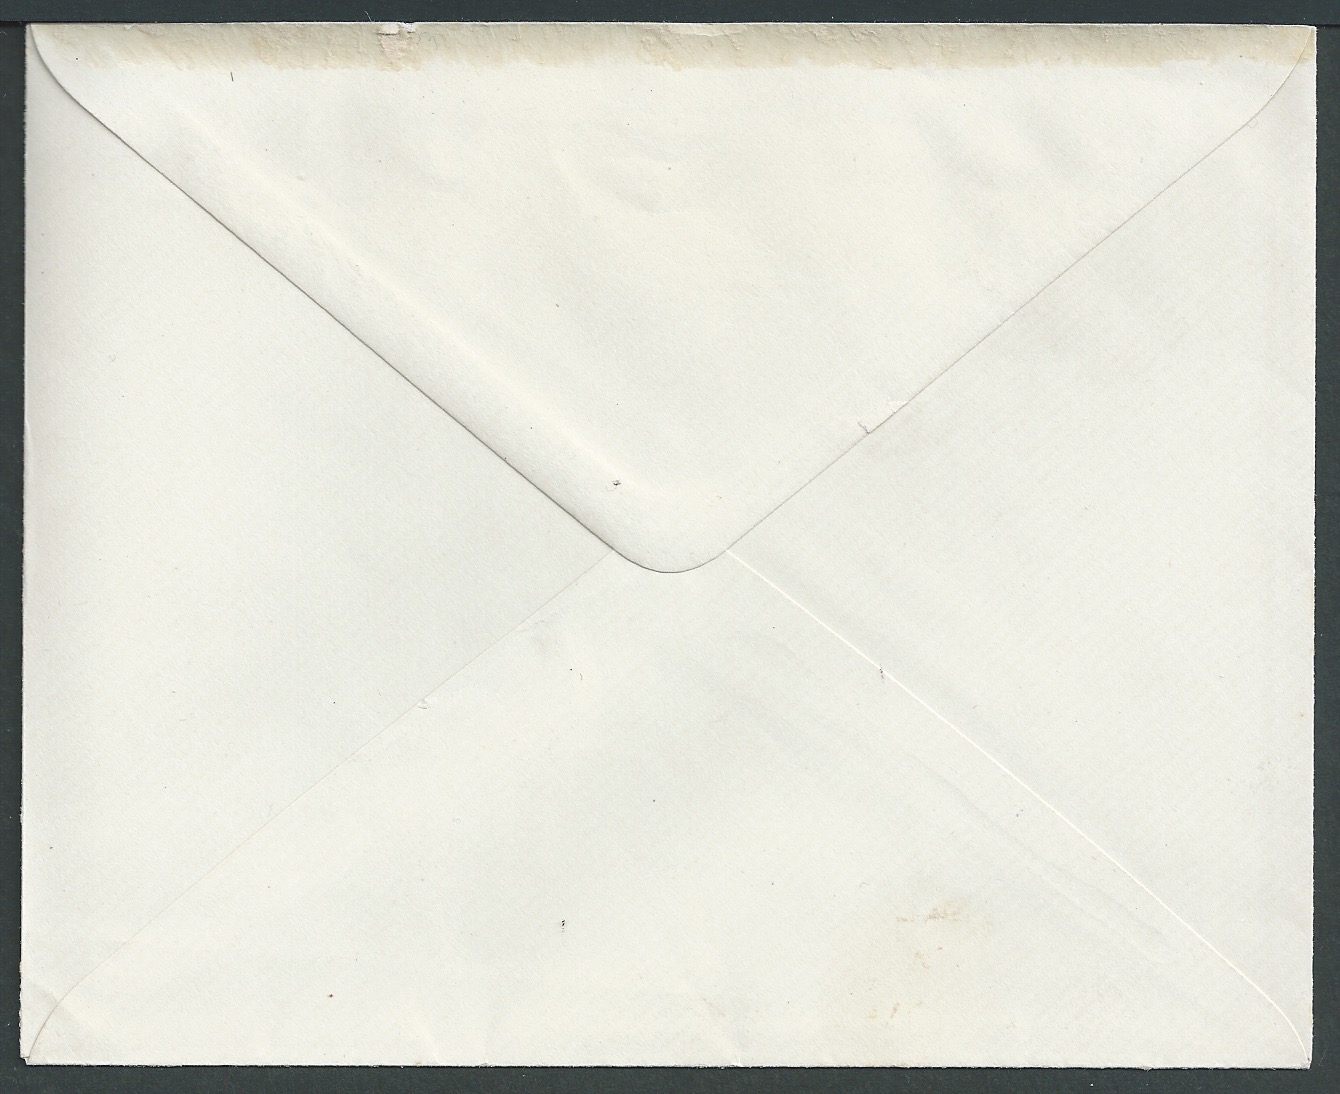 Universal Postal Union / Sweden 1906 Sweden Essay for a Reply Envelope printed in black - Image 4 of 4